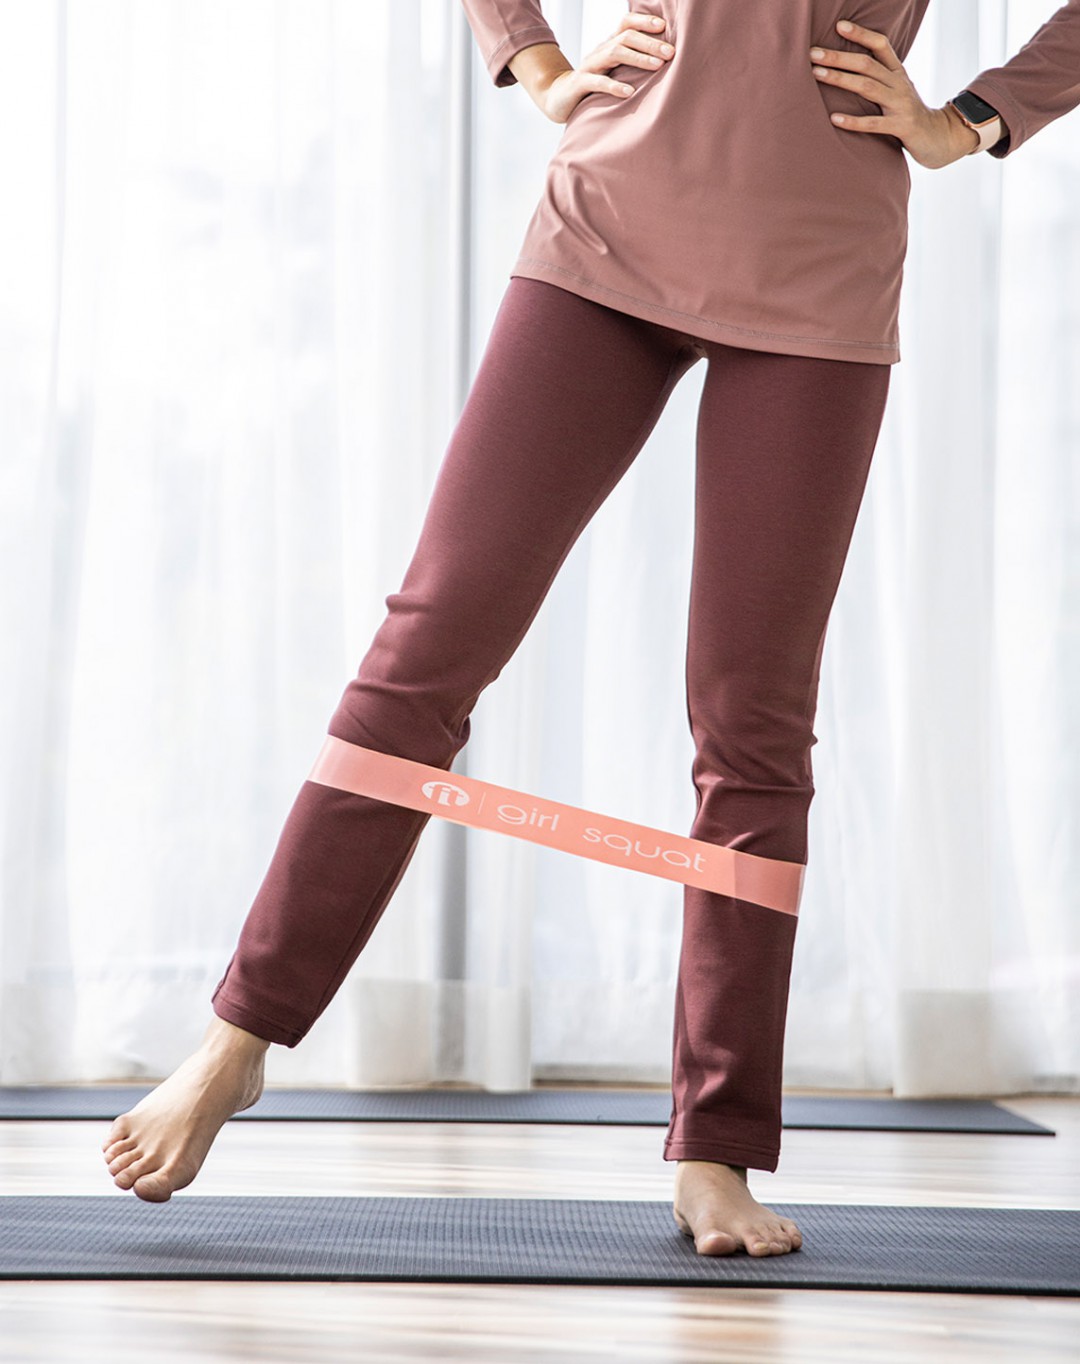 ARIANI FIT RESISTANCE BAND